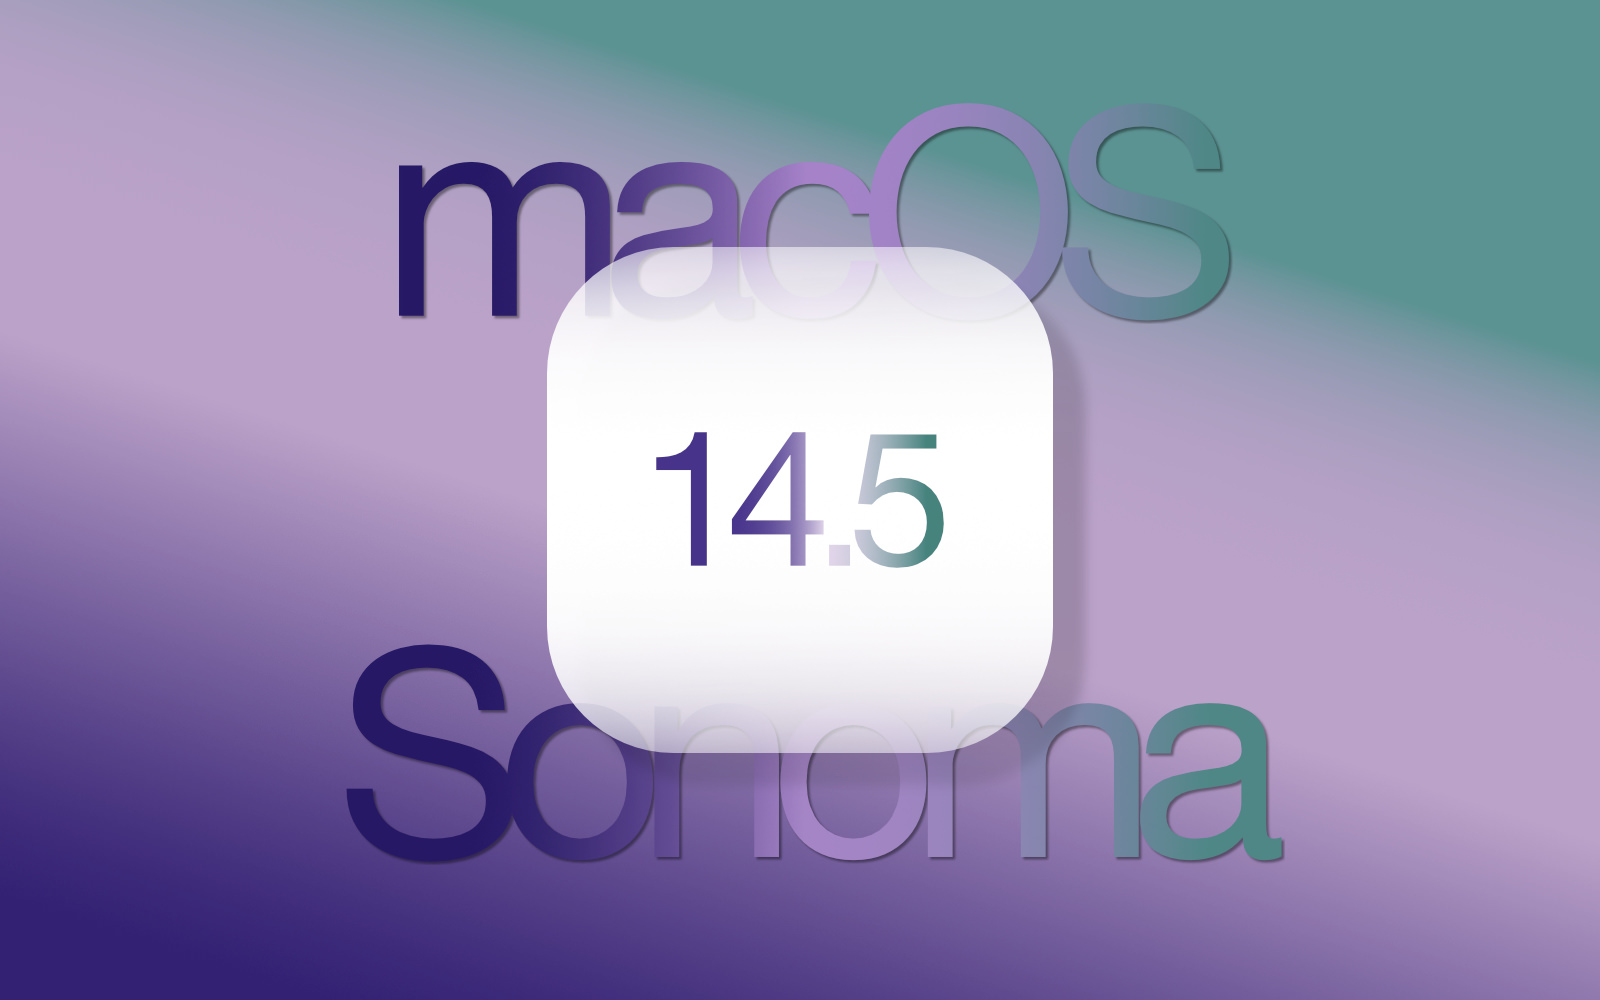 Macos Sonoma 14 5 official release